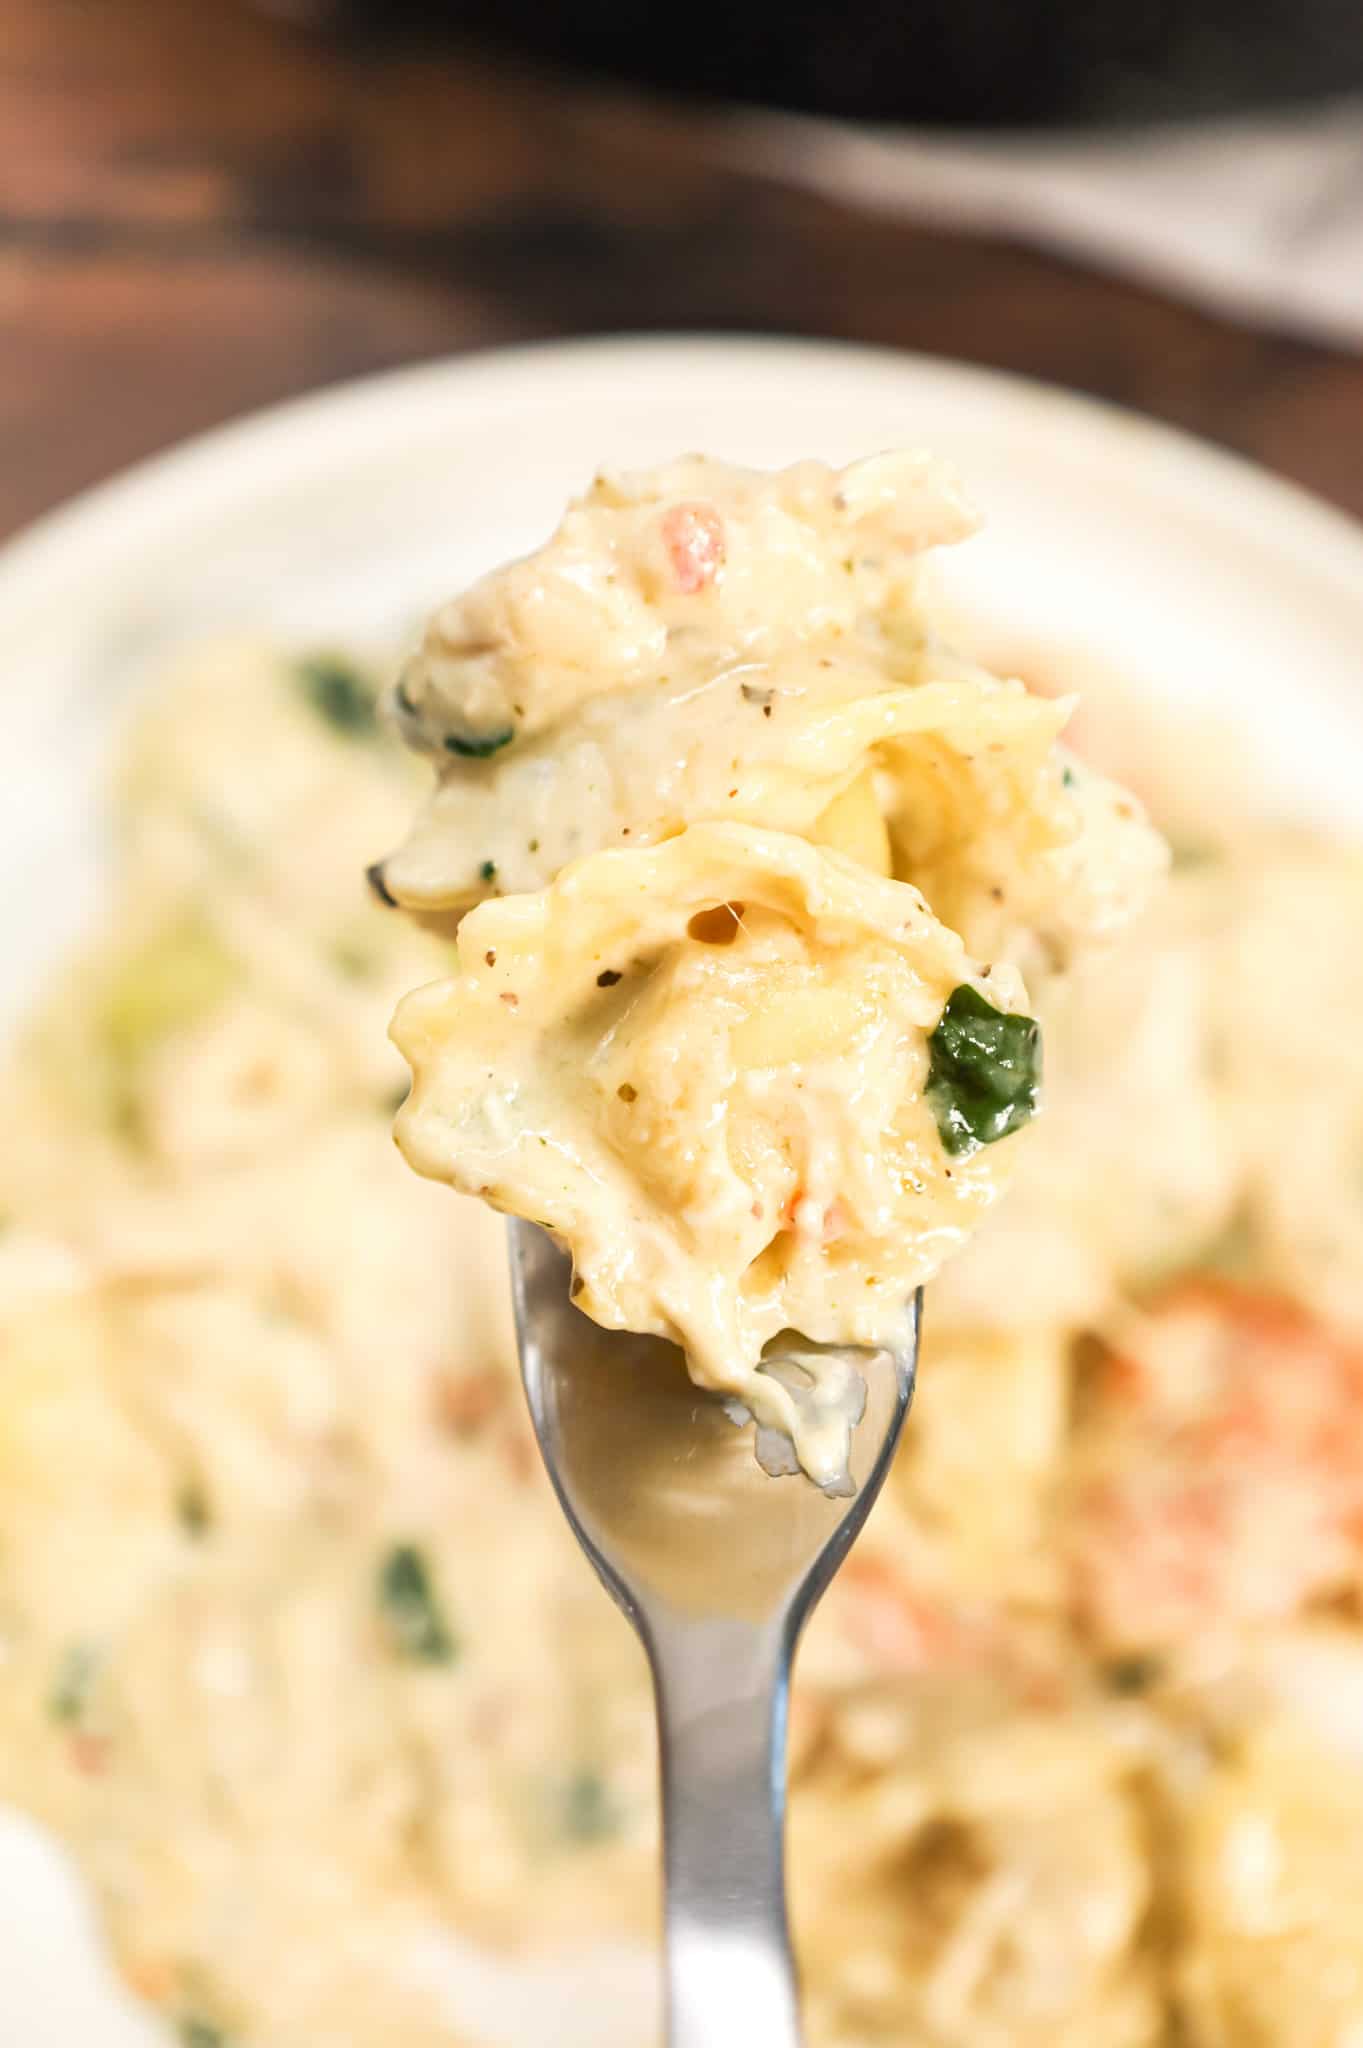 Chicken Tortellini Alfredo is an easy pasta recipe made with store bought cheese tortellini and shredded rotisserie chicken all tossed in a creamy garlic and parmesan sauce.